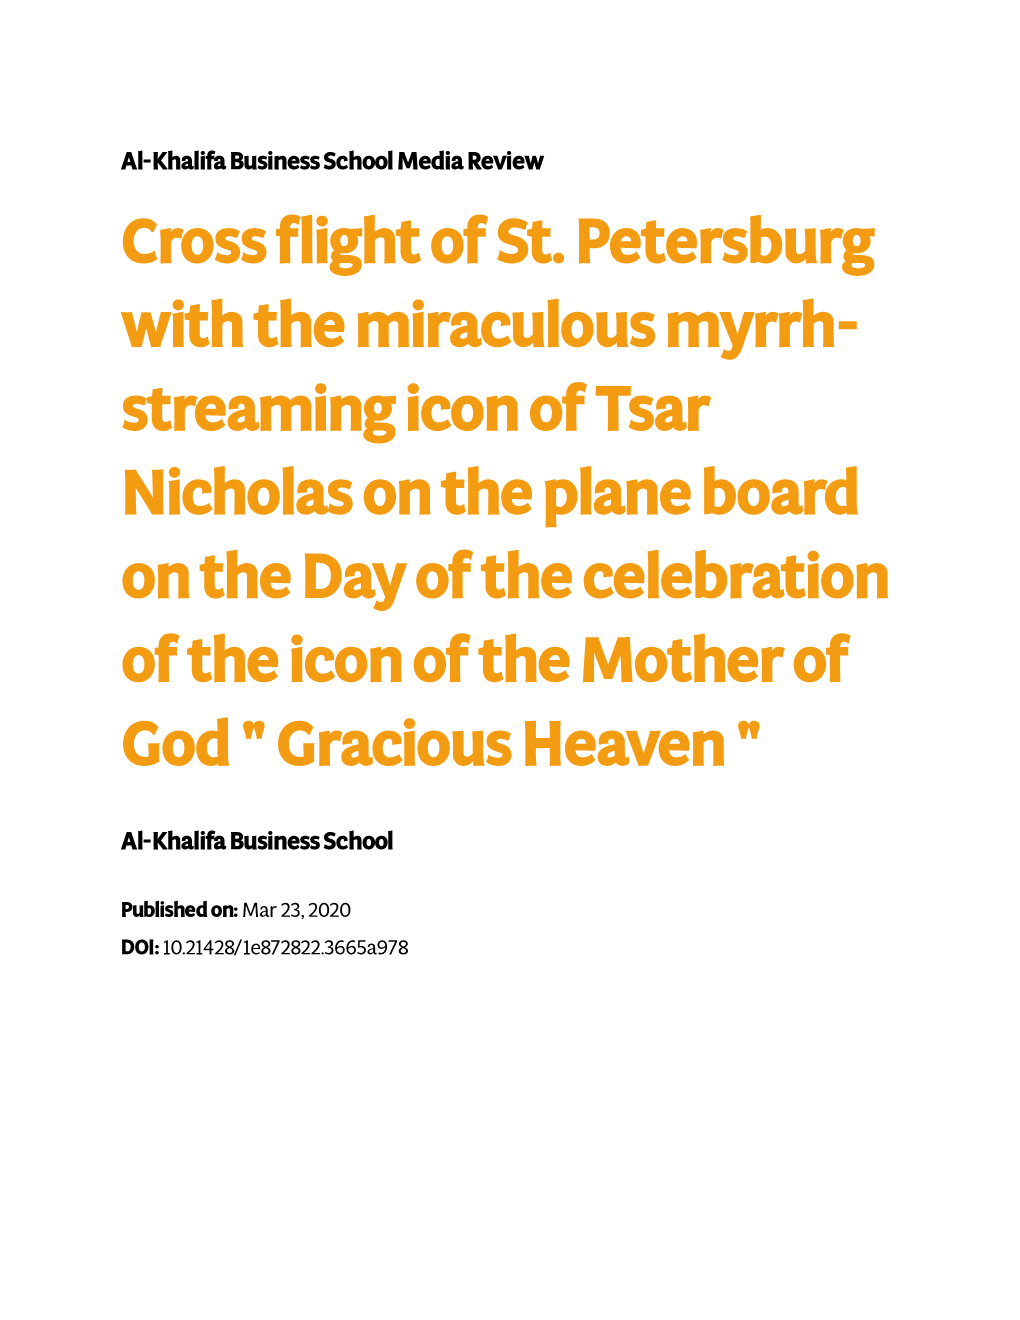 Cross Flight of St. Petersburg with the Miraculous Myrrh-Streaming Icon of Tsar Nicholas on the Plane Board on the Day of the Ce